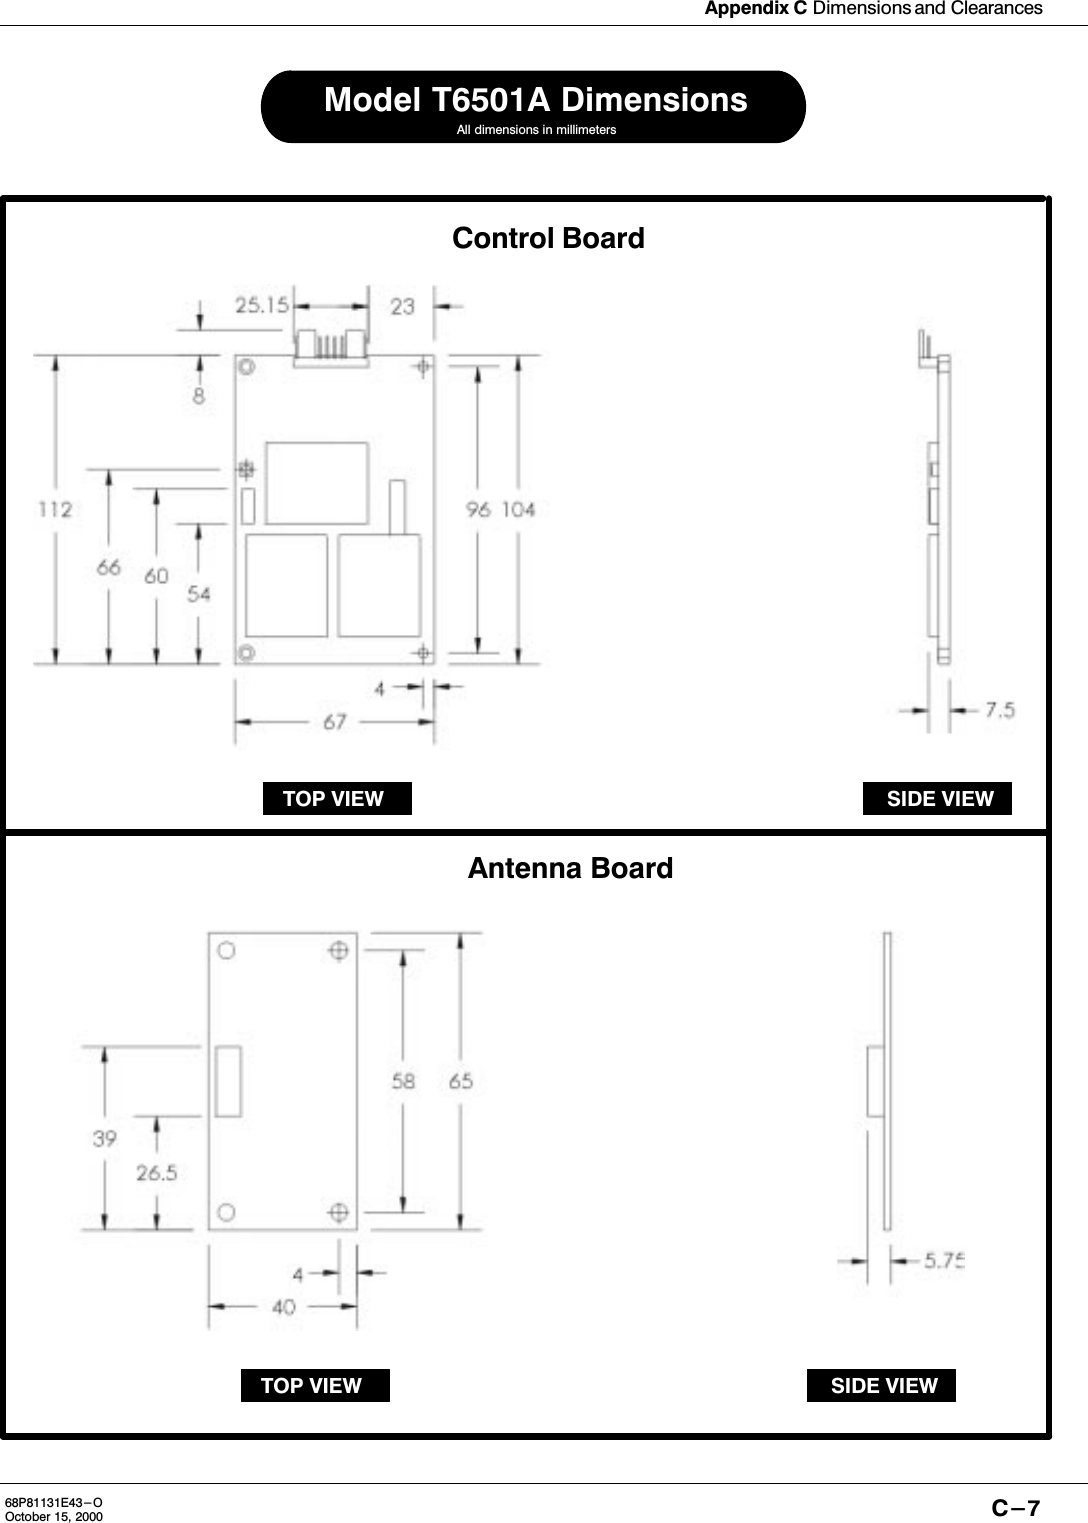 Appendix C Dimensions and ClearancesC-768P81131E43-OOctober 15, 2000Control BoardTOP VIEW SIDE VIEWAntenna BoardAll dimensions in millimetersModel T6501A DimensionsSIDE VIEWTOP VIEW